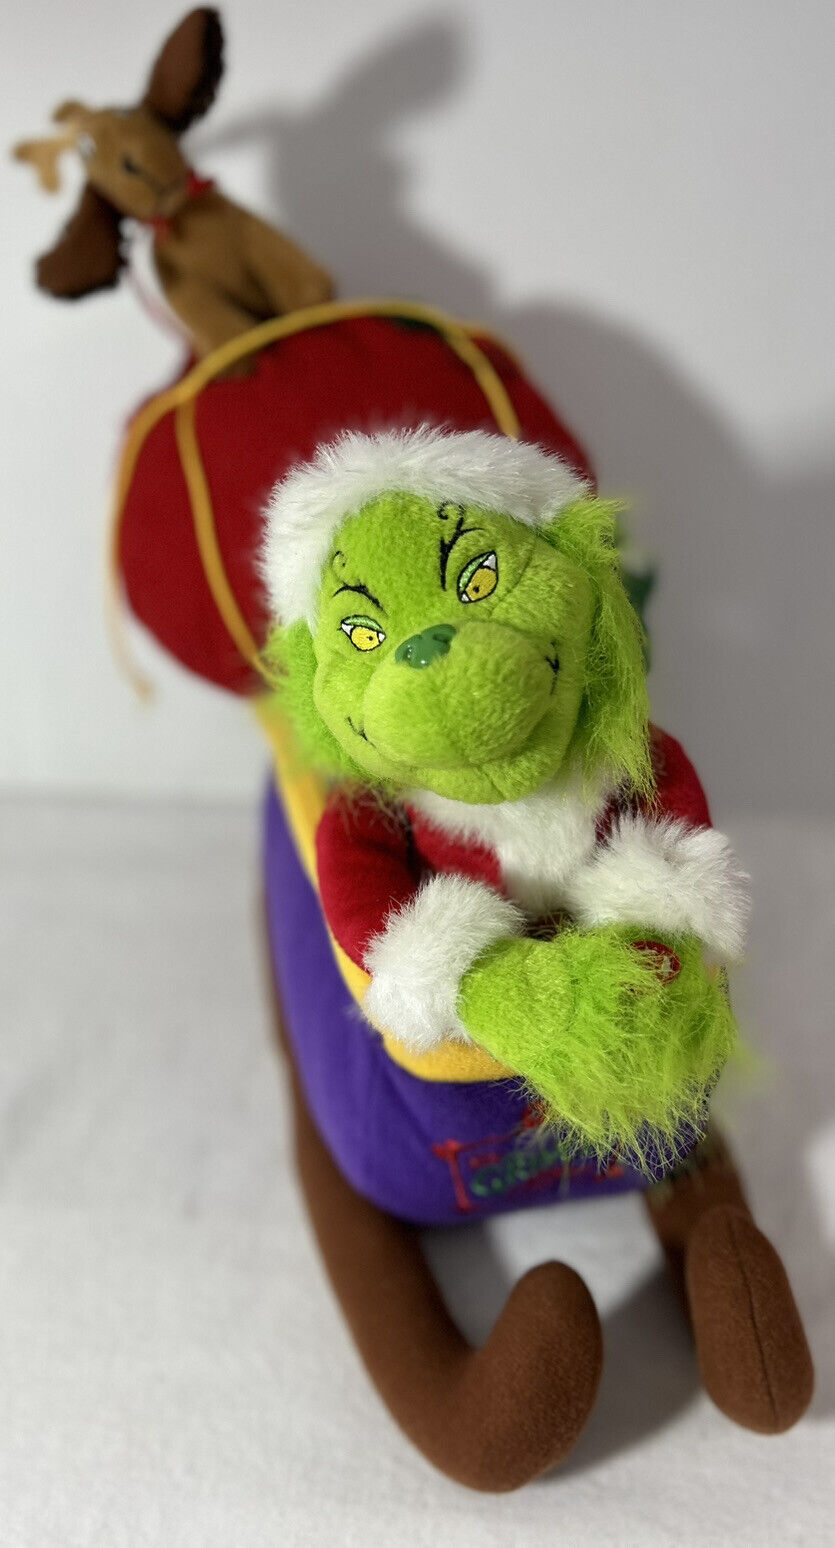 How The Grinch Stole Christmas Singing Sleigh Ride Plush Beverly Hills Works